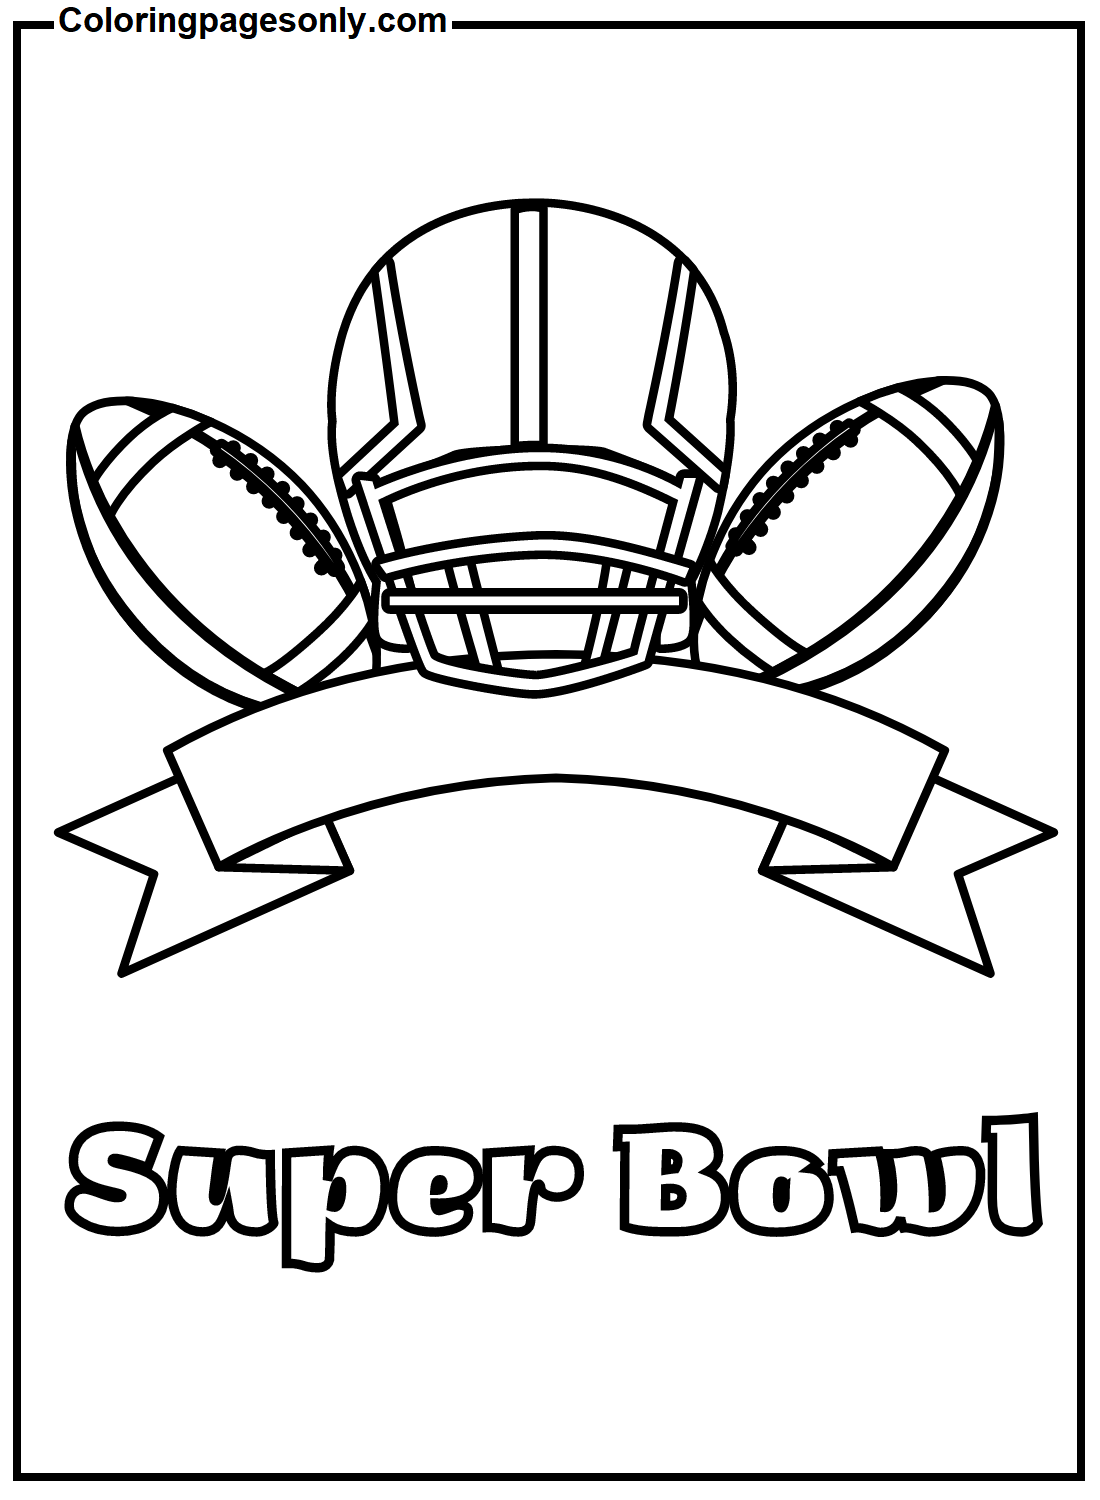 56th Super Bowl Image Coloring Page Free Printable Coloring Pages